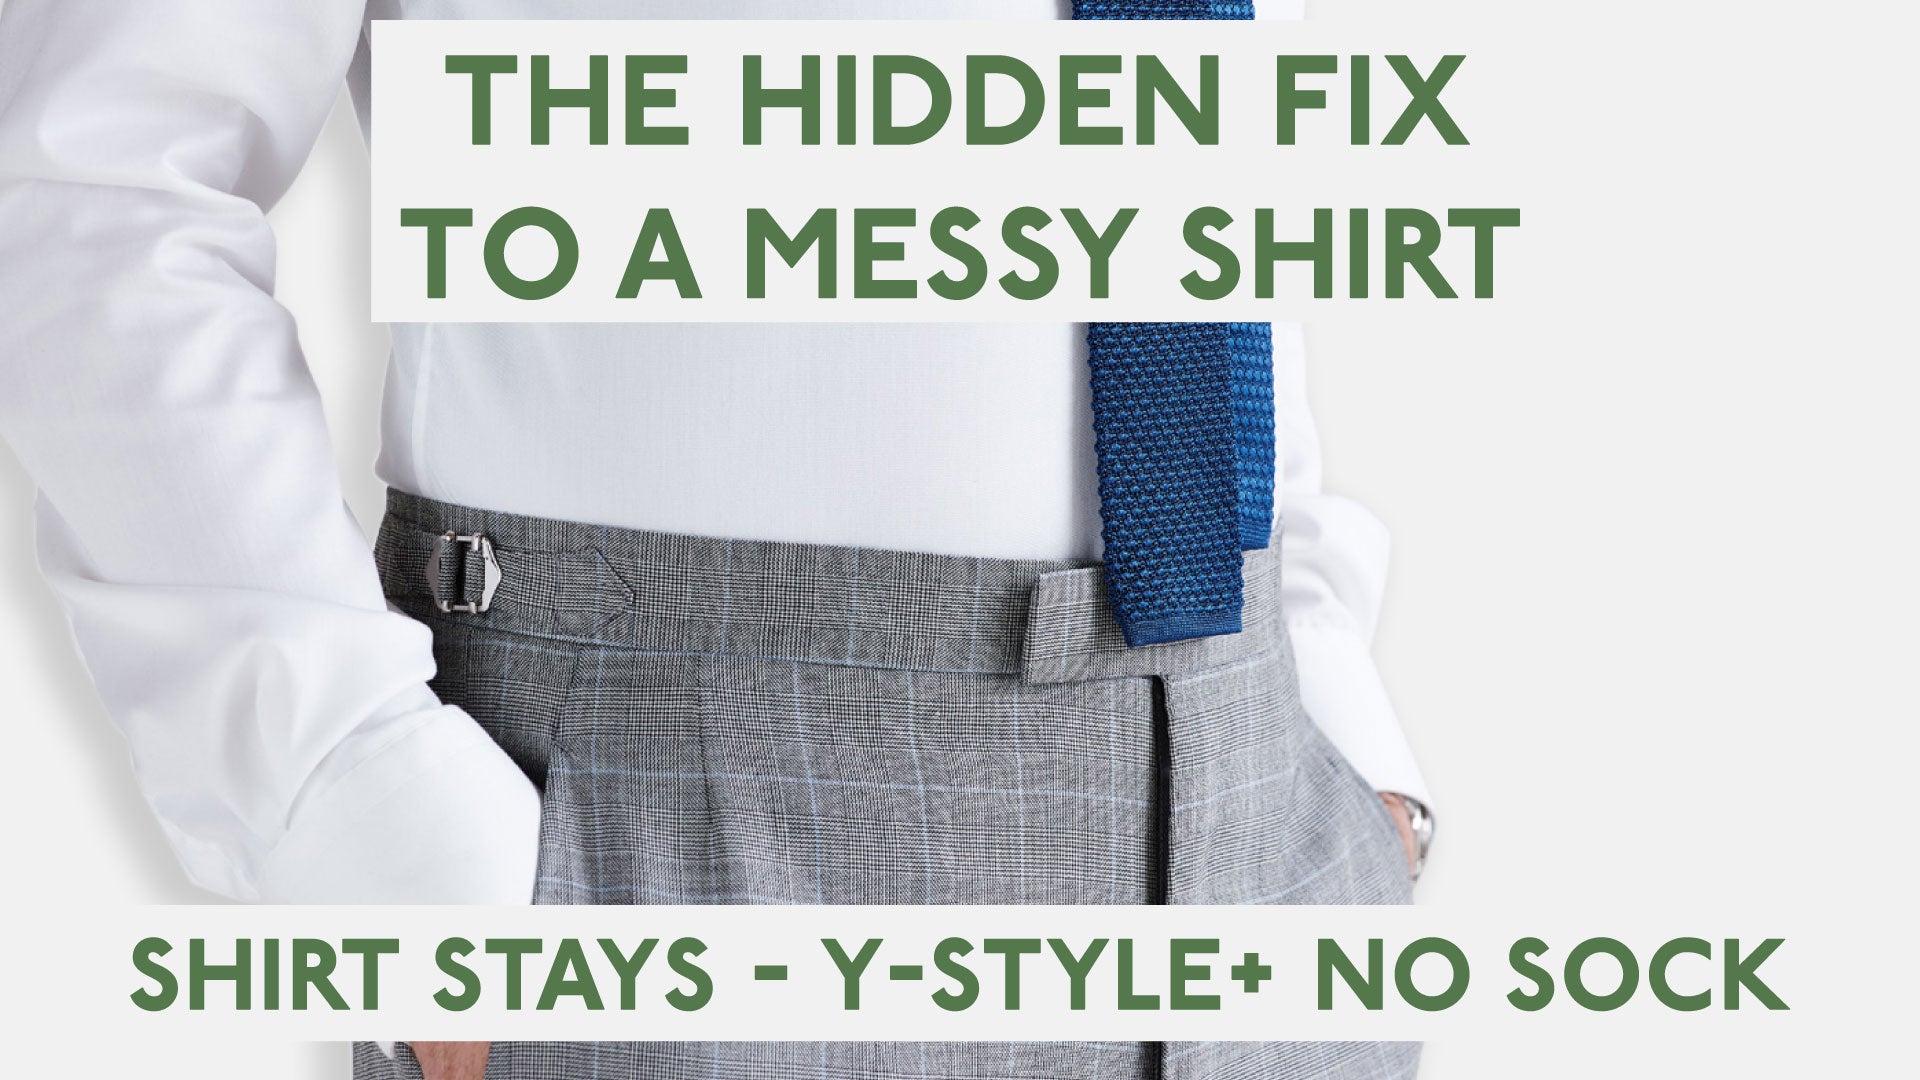 The Hidden Fix to a Messy Shirt - Our Shirt Stays Y Style + No Sock.